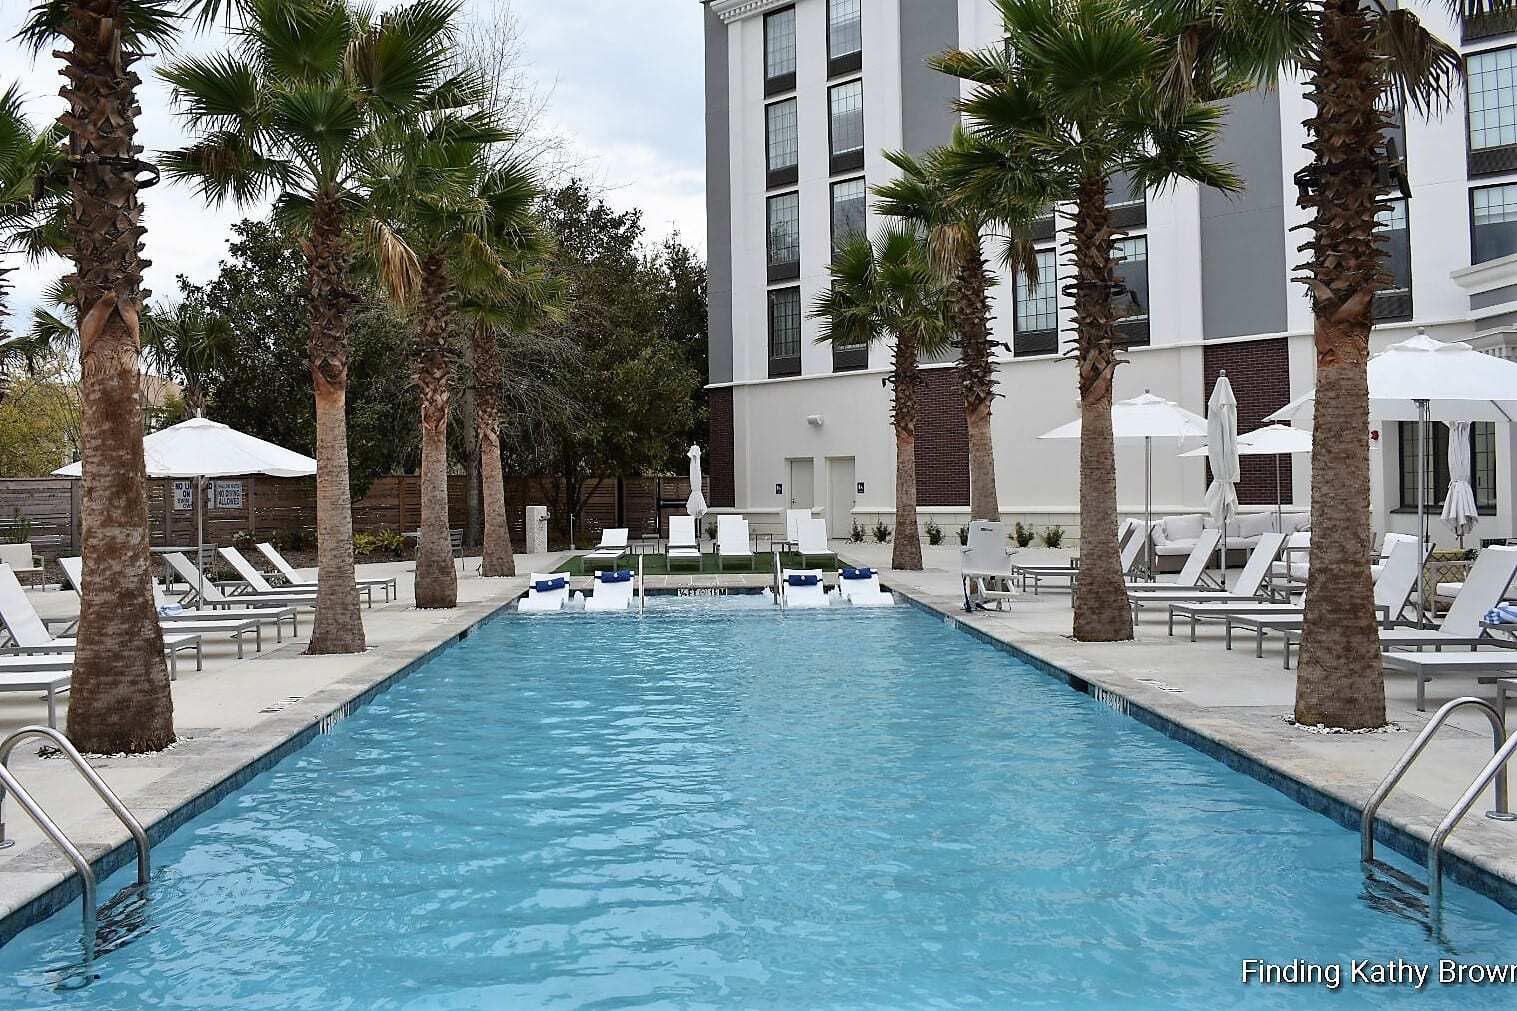 "Relaxing Resort-Style Pool at Hotel Indigo Mt Pleasant, South Carolina. Enjoy a serene oasis with palm trees, umbrellas, and comfortable loungers. Sunk-in lounge chairs in the shallow end offer the perfect spot for ultimate relaxation."